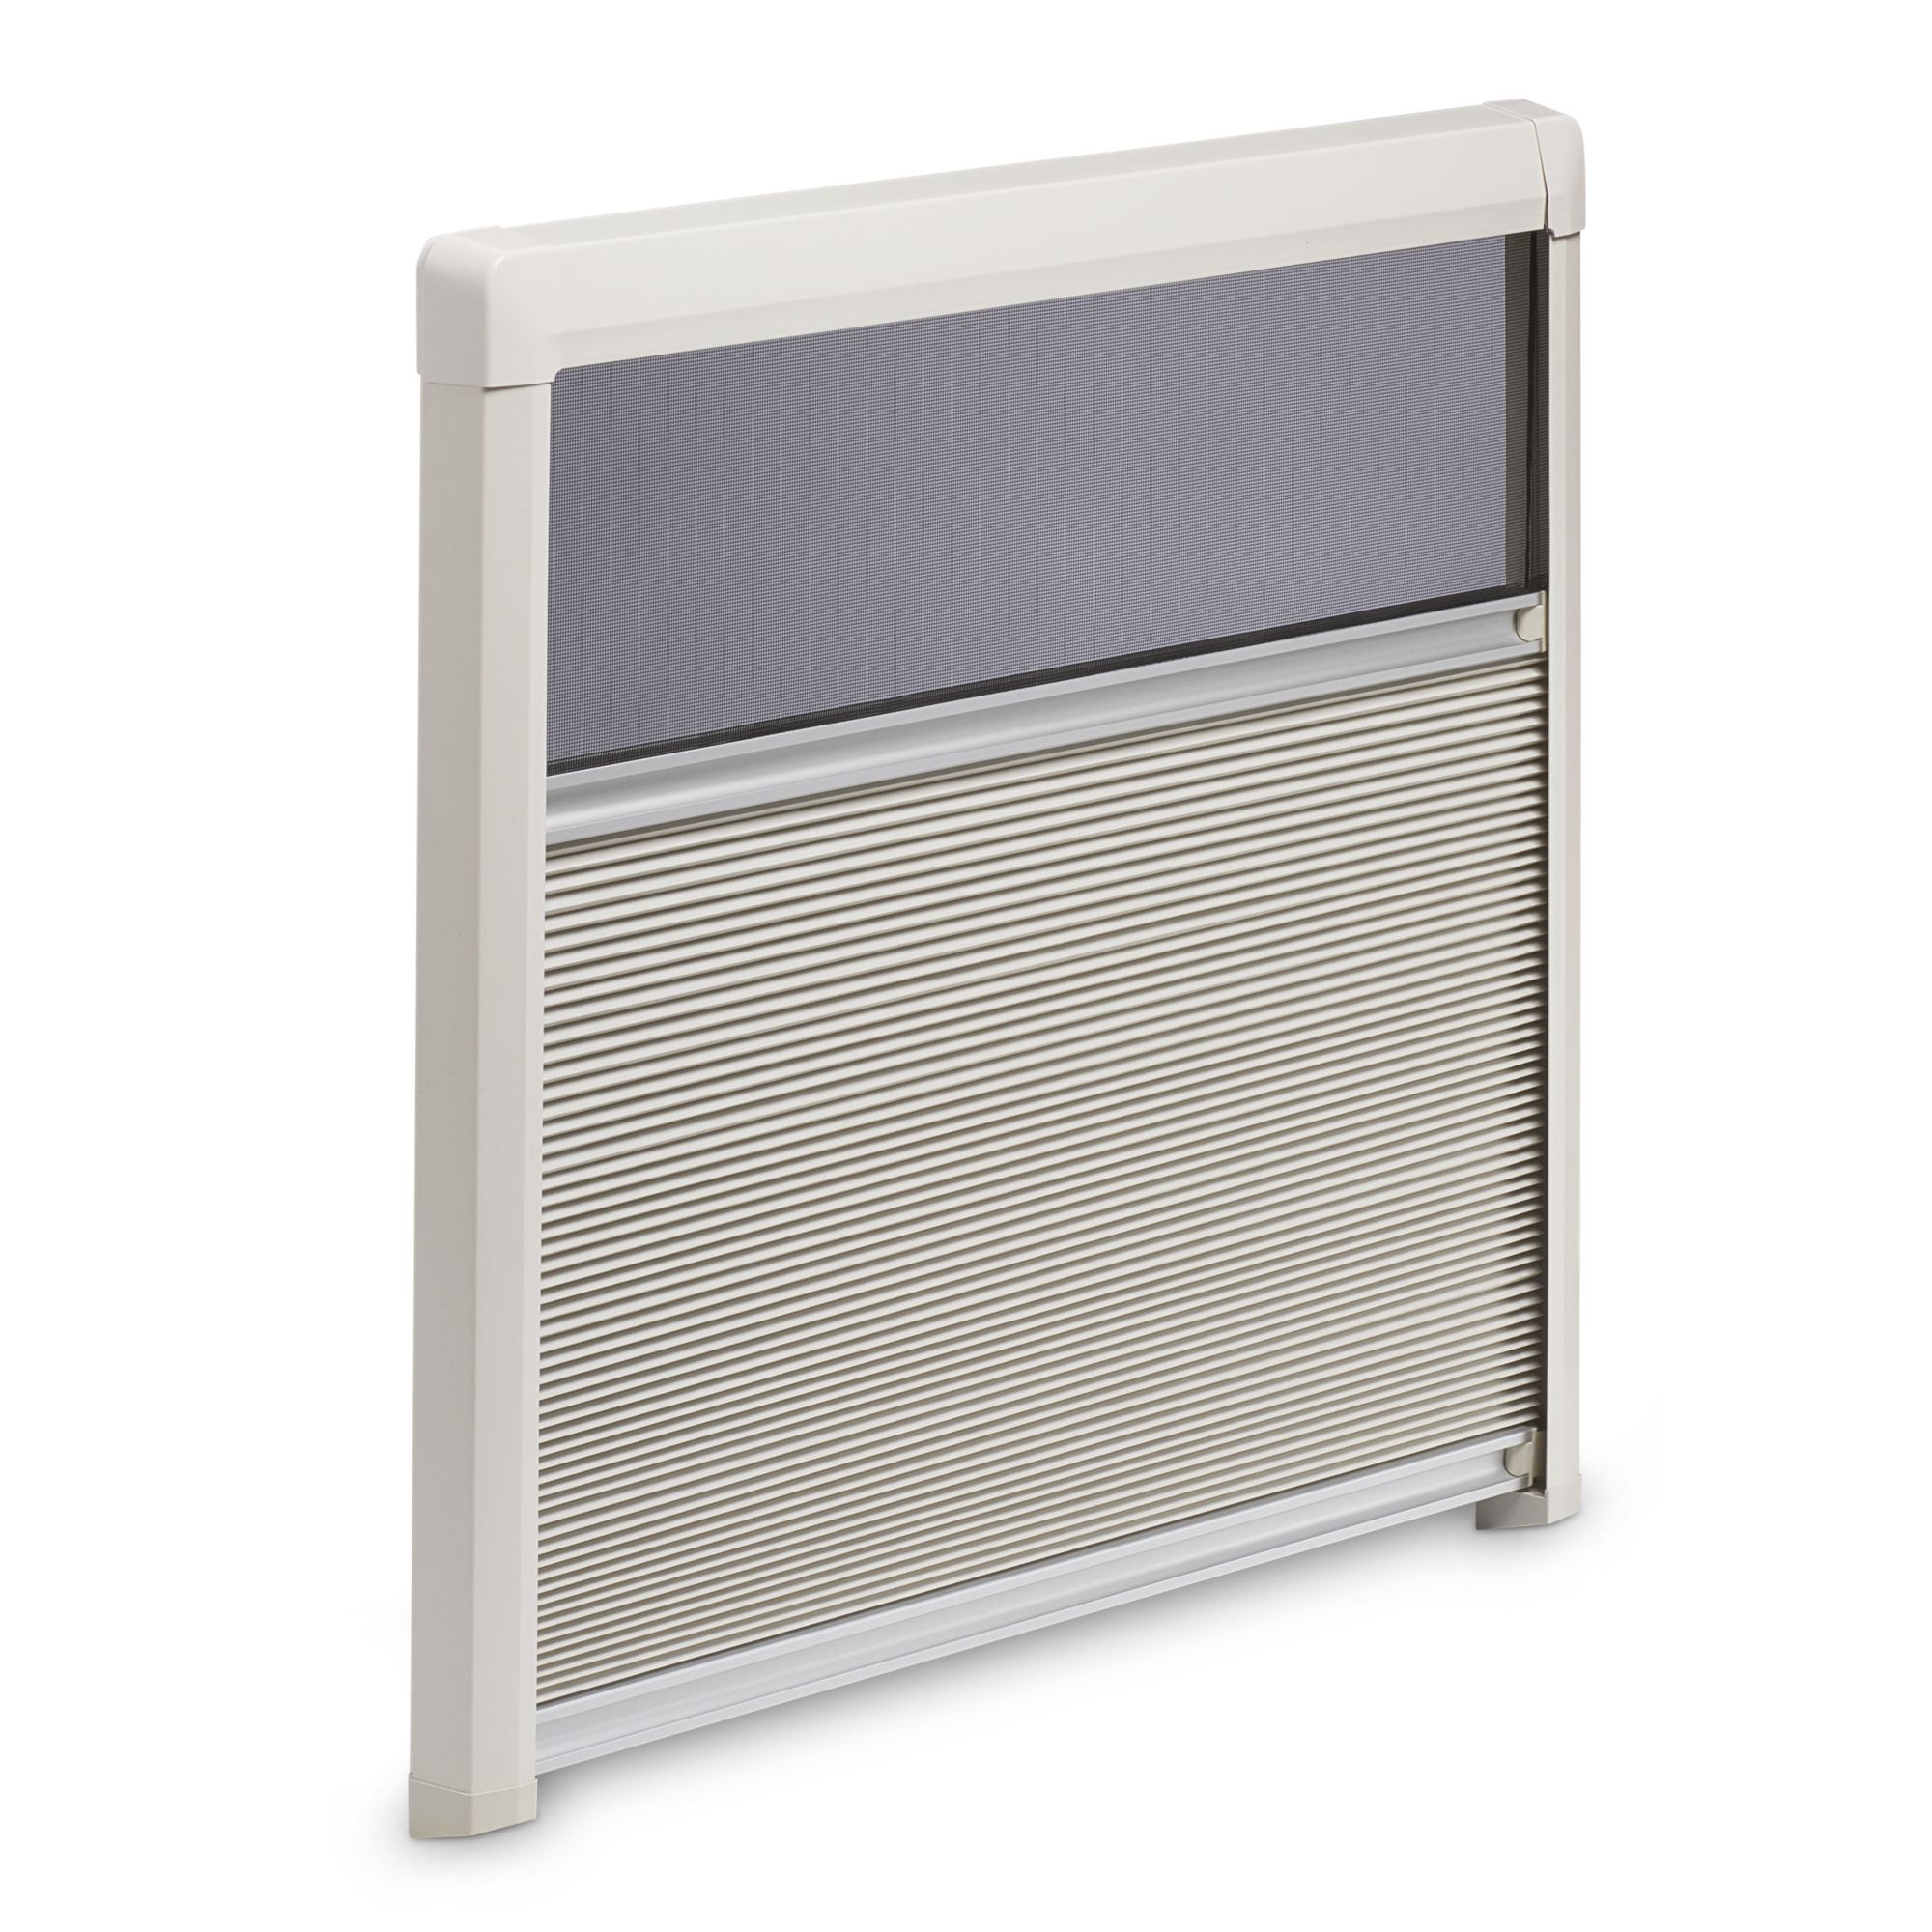 Dometic DB3H Roller Blind double-pleated, 785 x 700 mm, creme-white